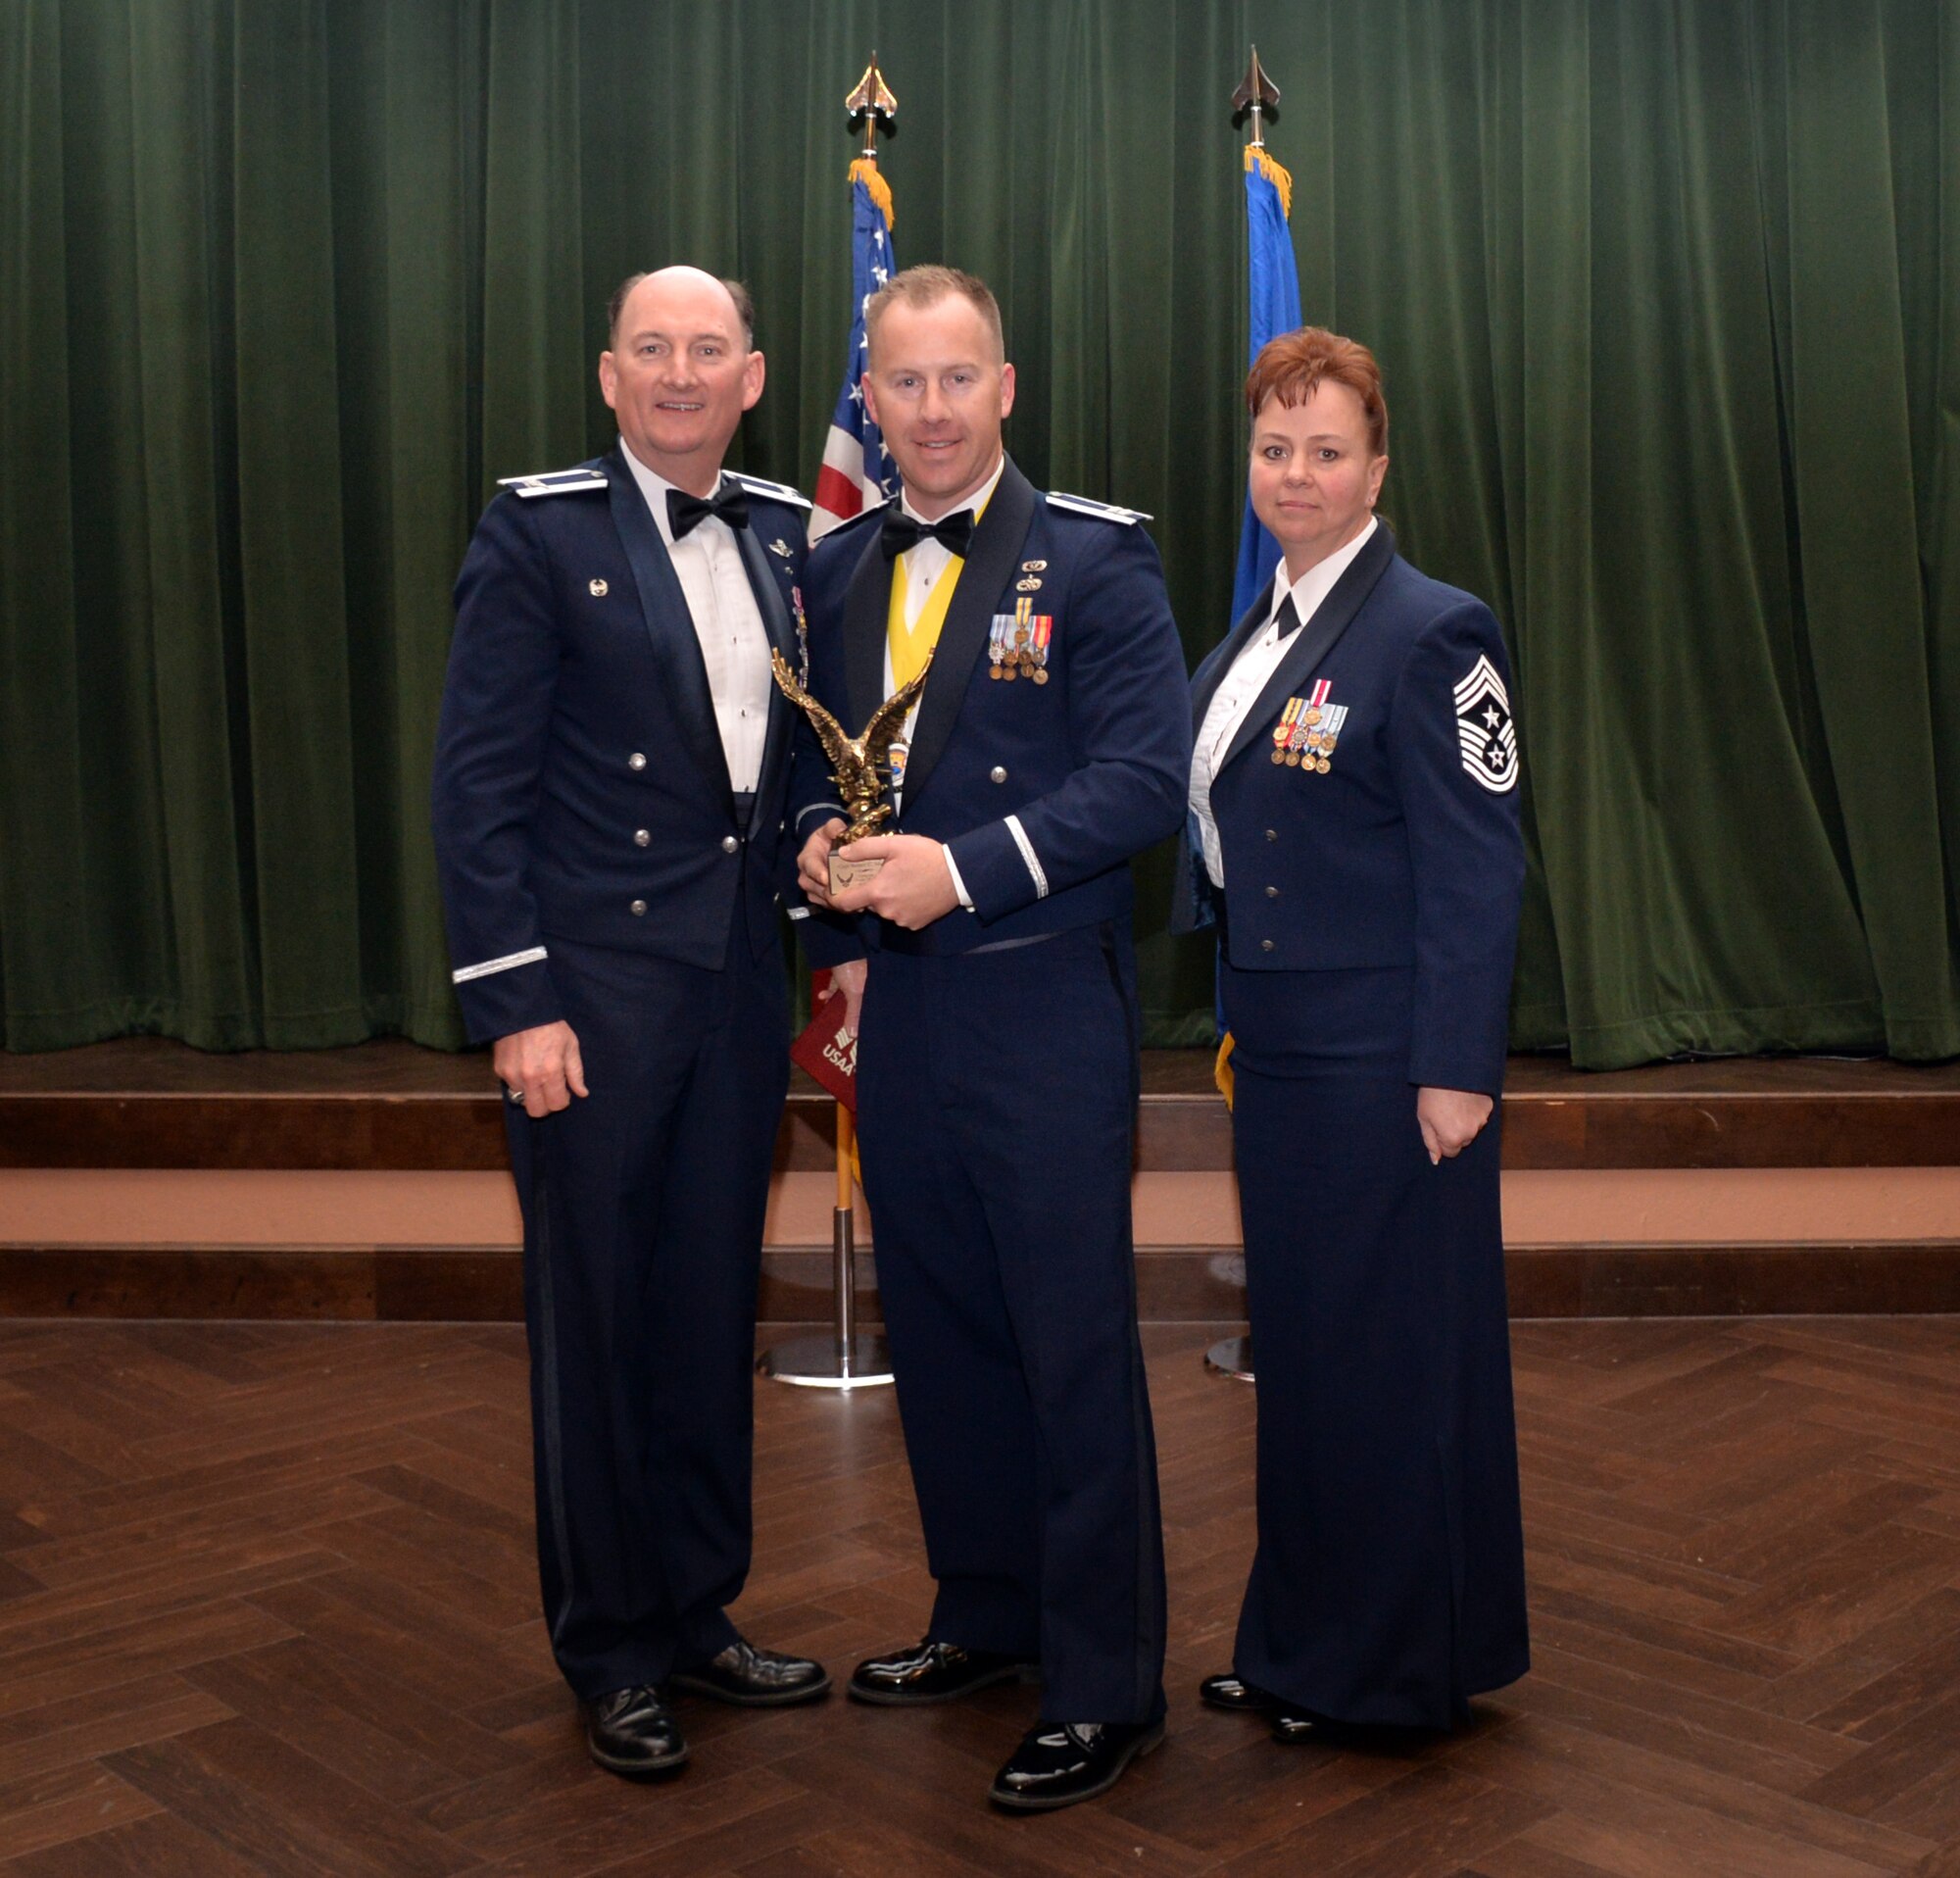 Col. Thomas K. Smith, 433rd Airlift Wing commander, and 433rd AW Command Chief Master Sgt. Shana C. Cullum, award Capt. Chad Marbut, 433rd Civil Engineer Squadron, as the Company Grade Officer of the Year at the 433rd AW annual awards banquet at Joint Base San Antonio-Lackland, Texas Feb. 9, 2019.